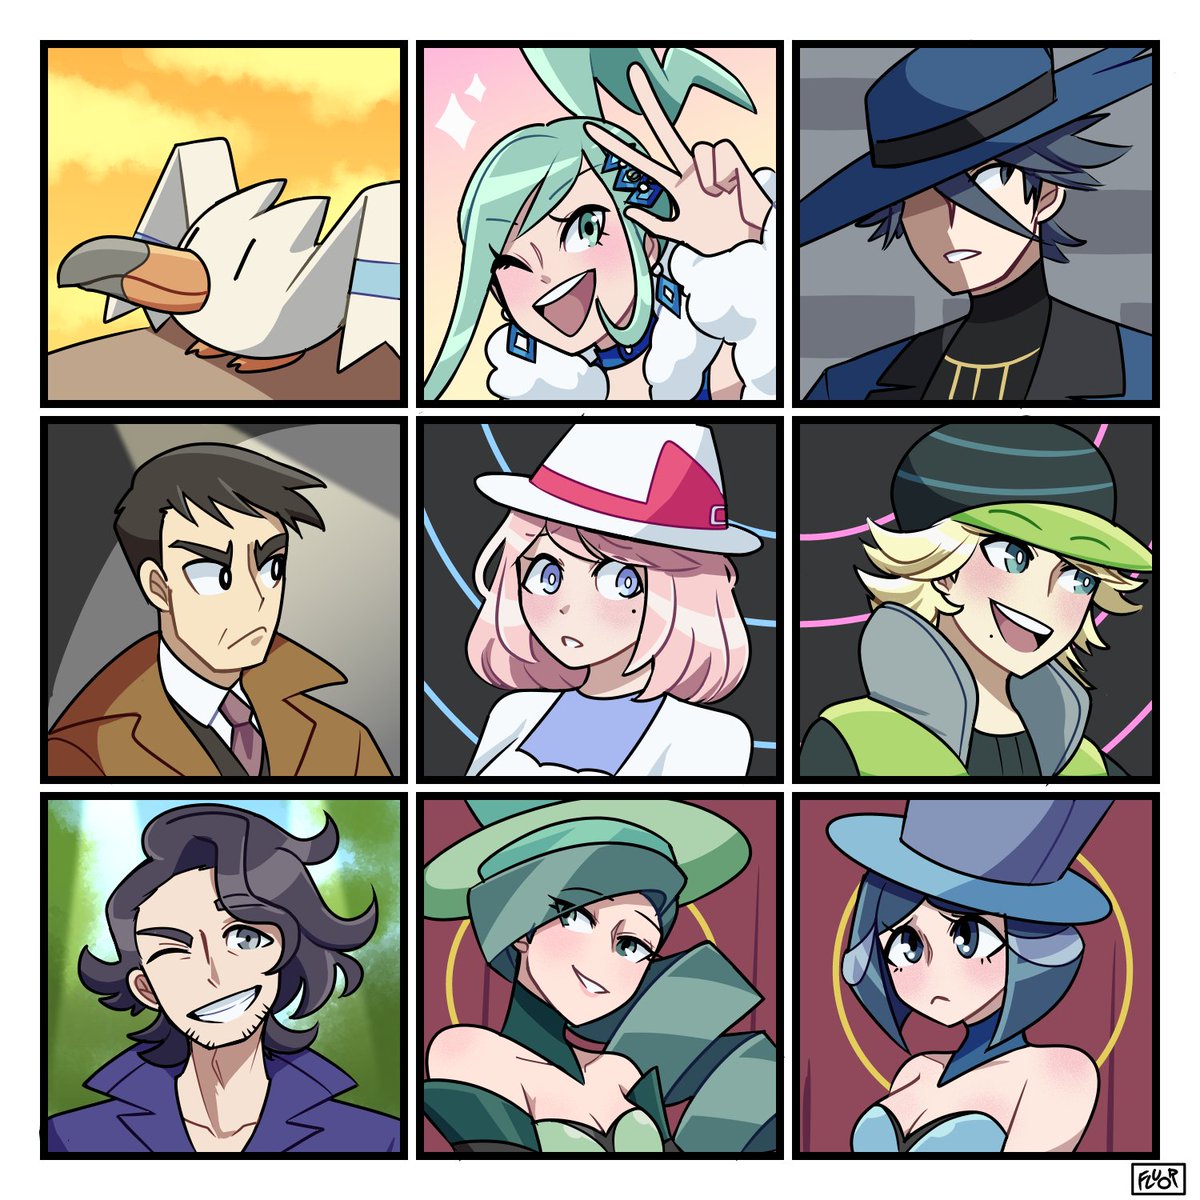 [#Pokemon] Finally, the last part of the 5k follower special Twitter request portraits! This part's theme is "everyone who didn't fit any of the previous categories". As always, the characters are listed in the alt text! 